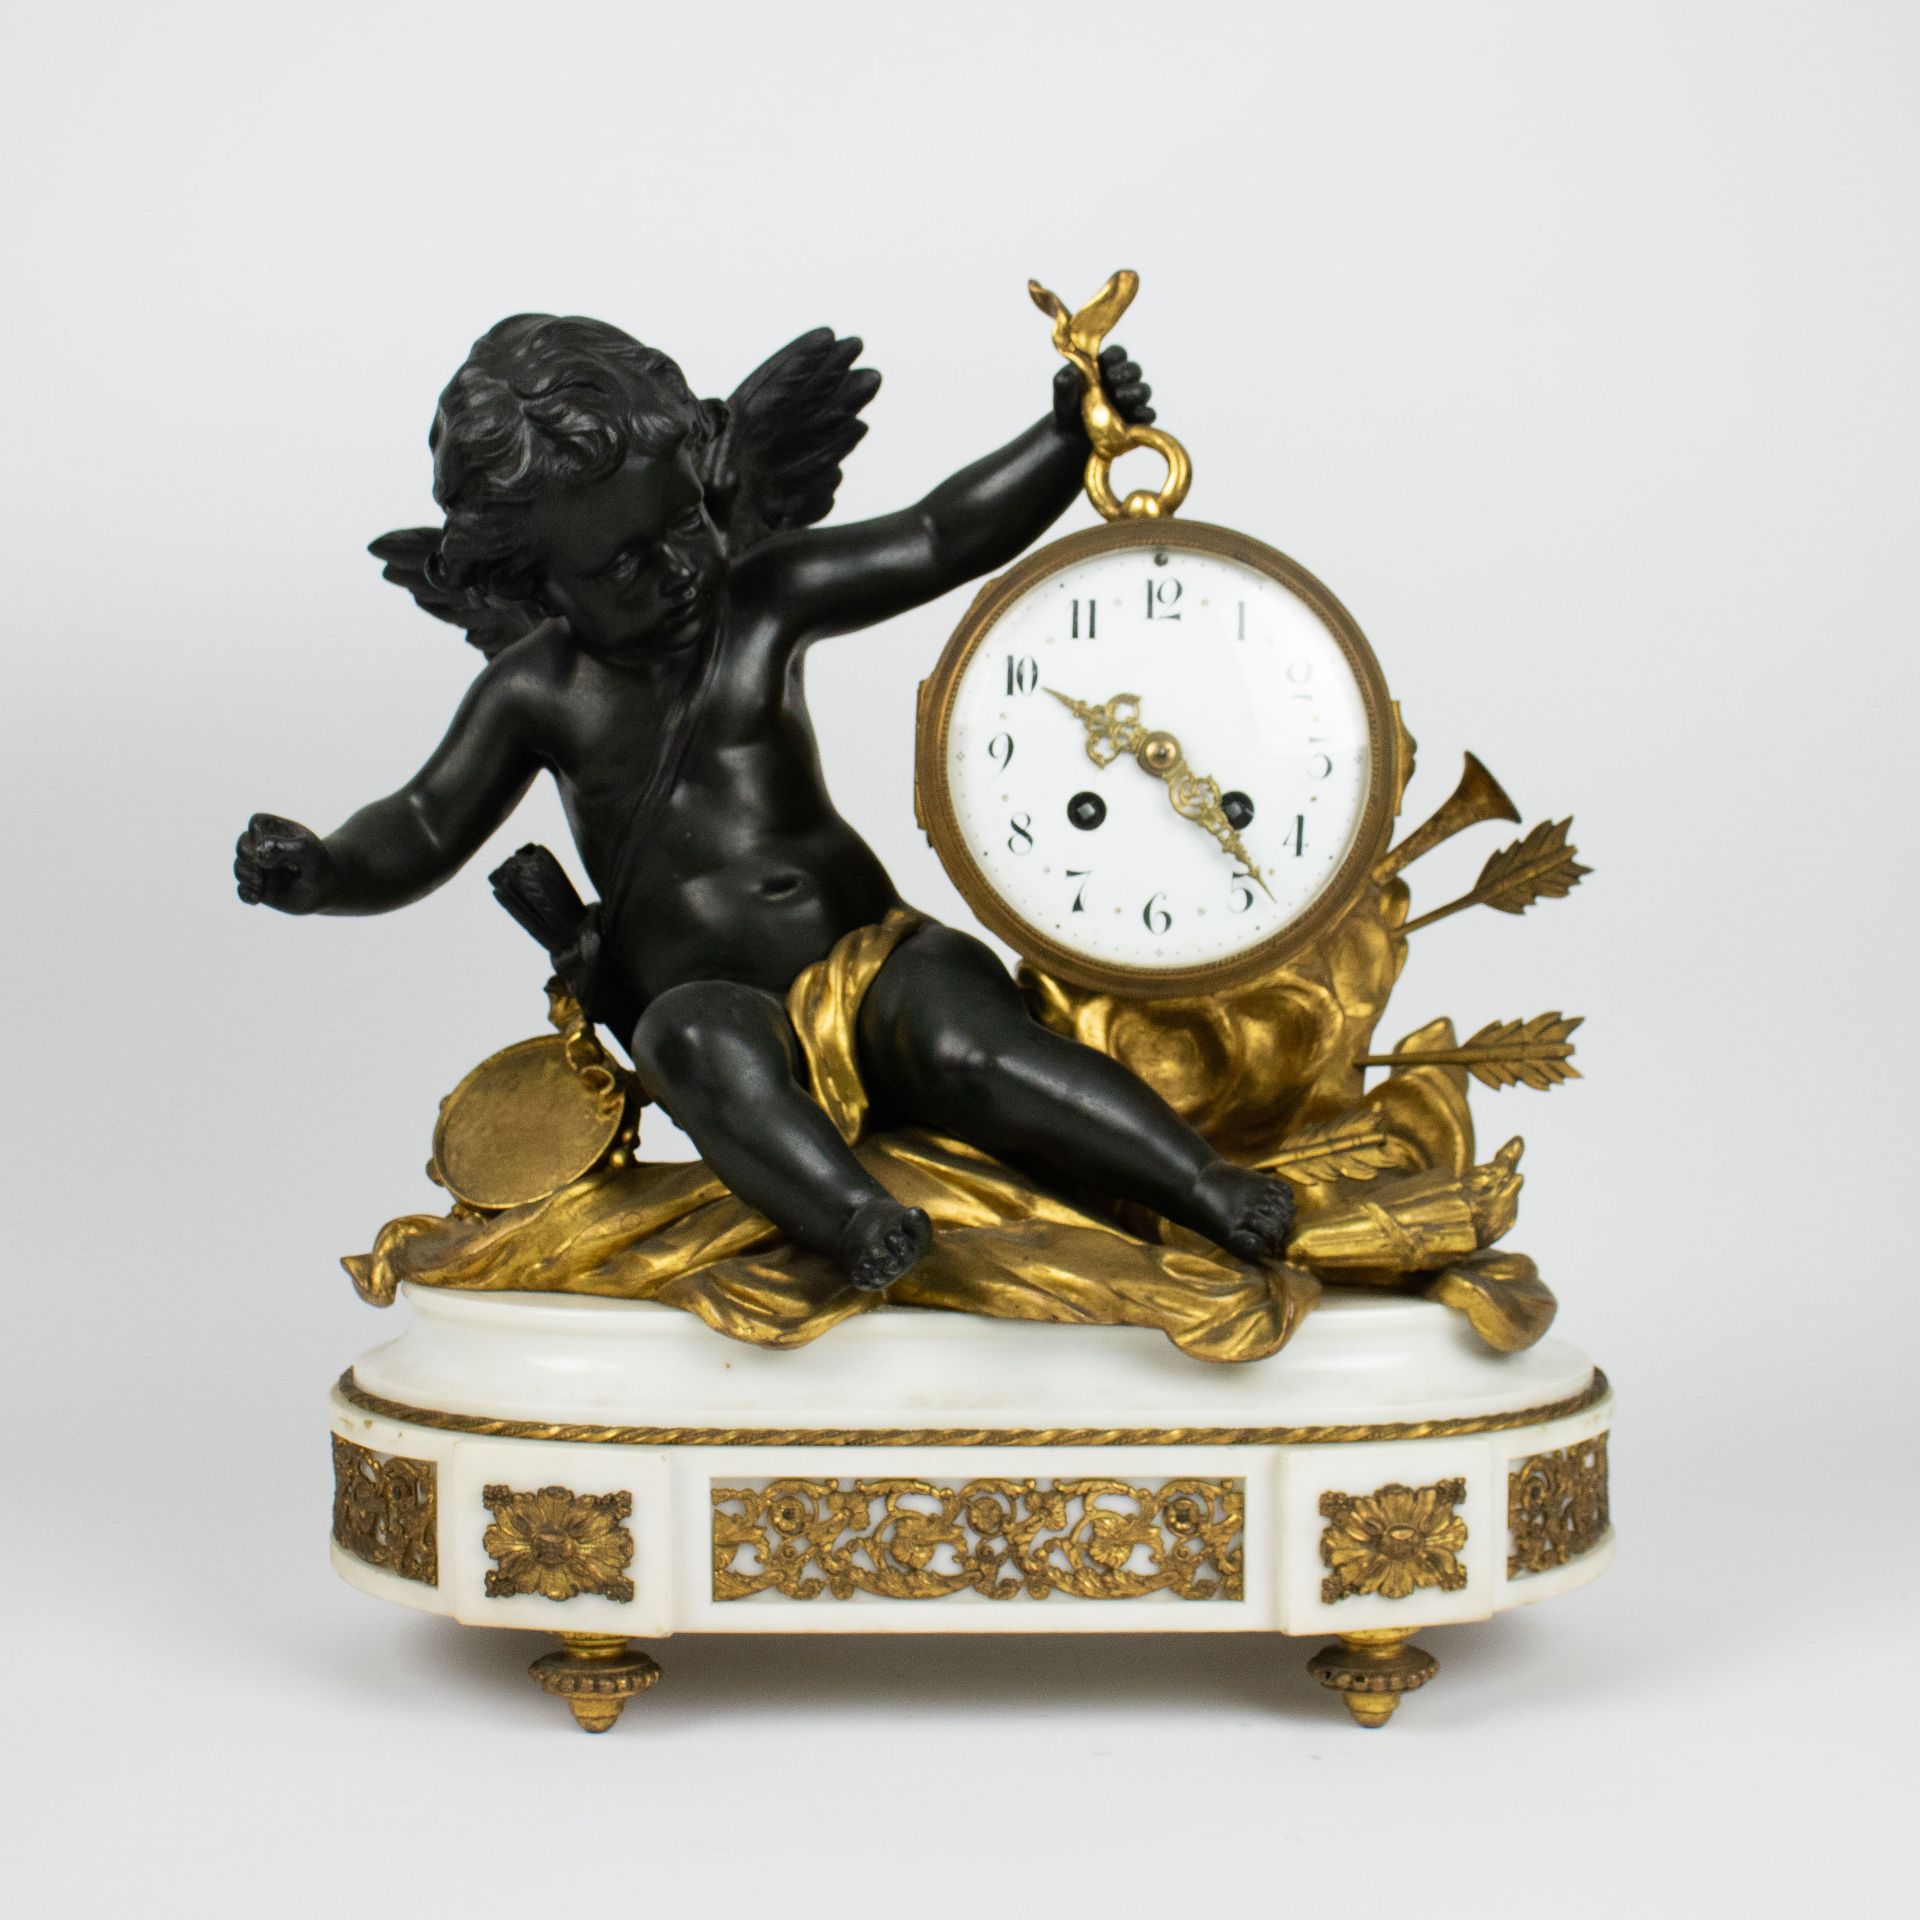 A Louis XVI style clock and candelabra in marble and bronze - Image 2 of 8